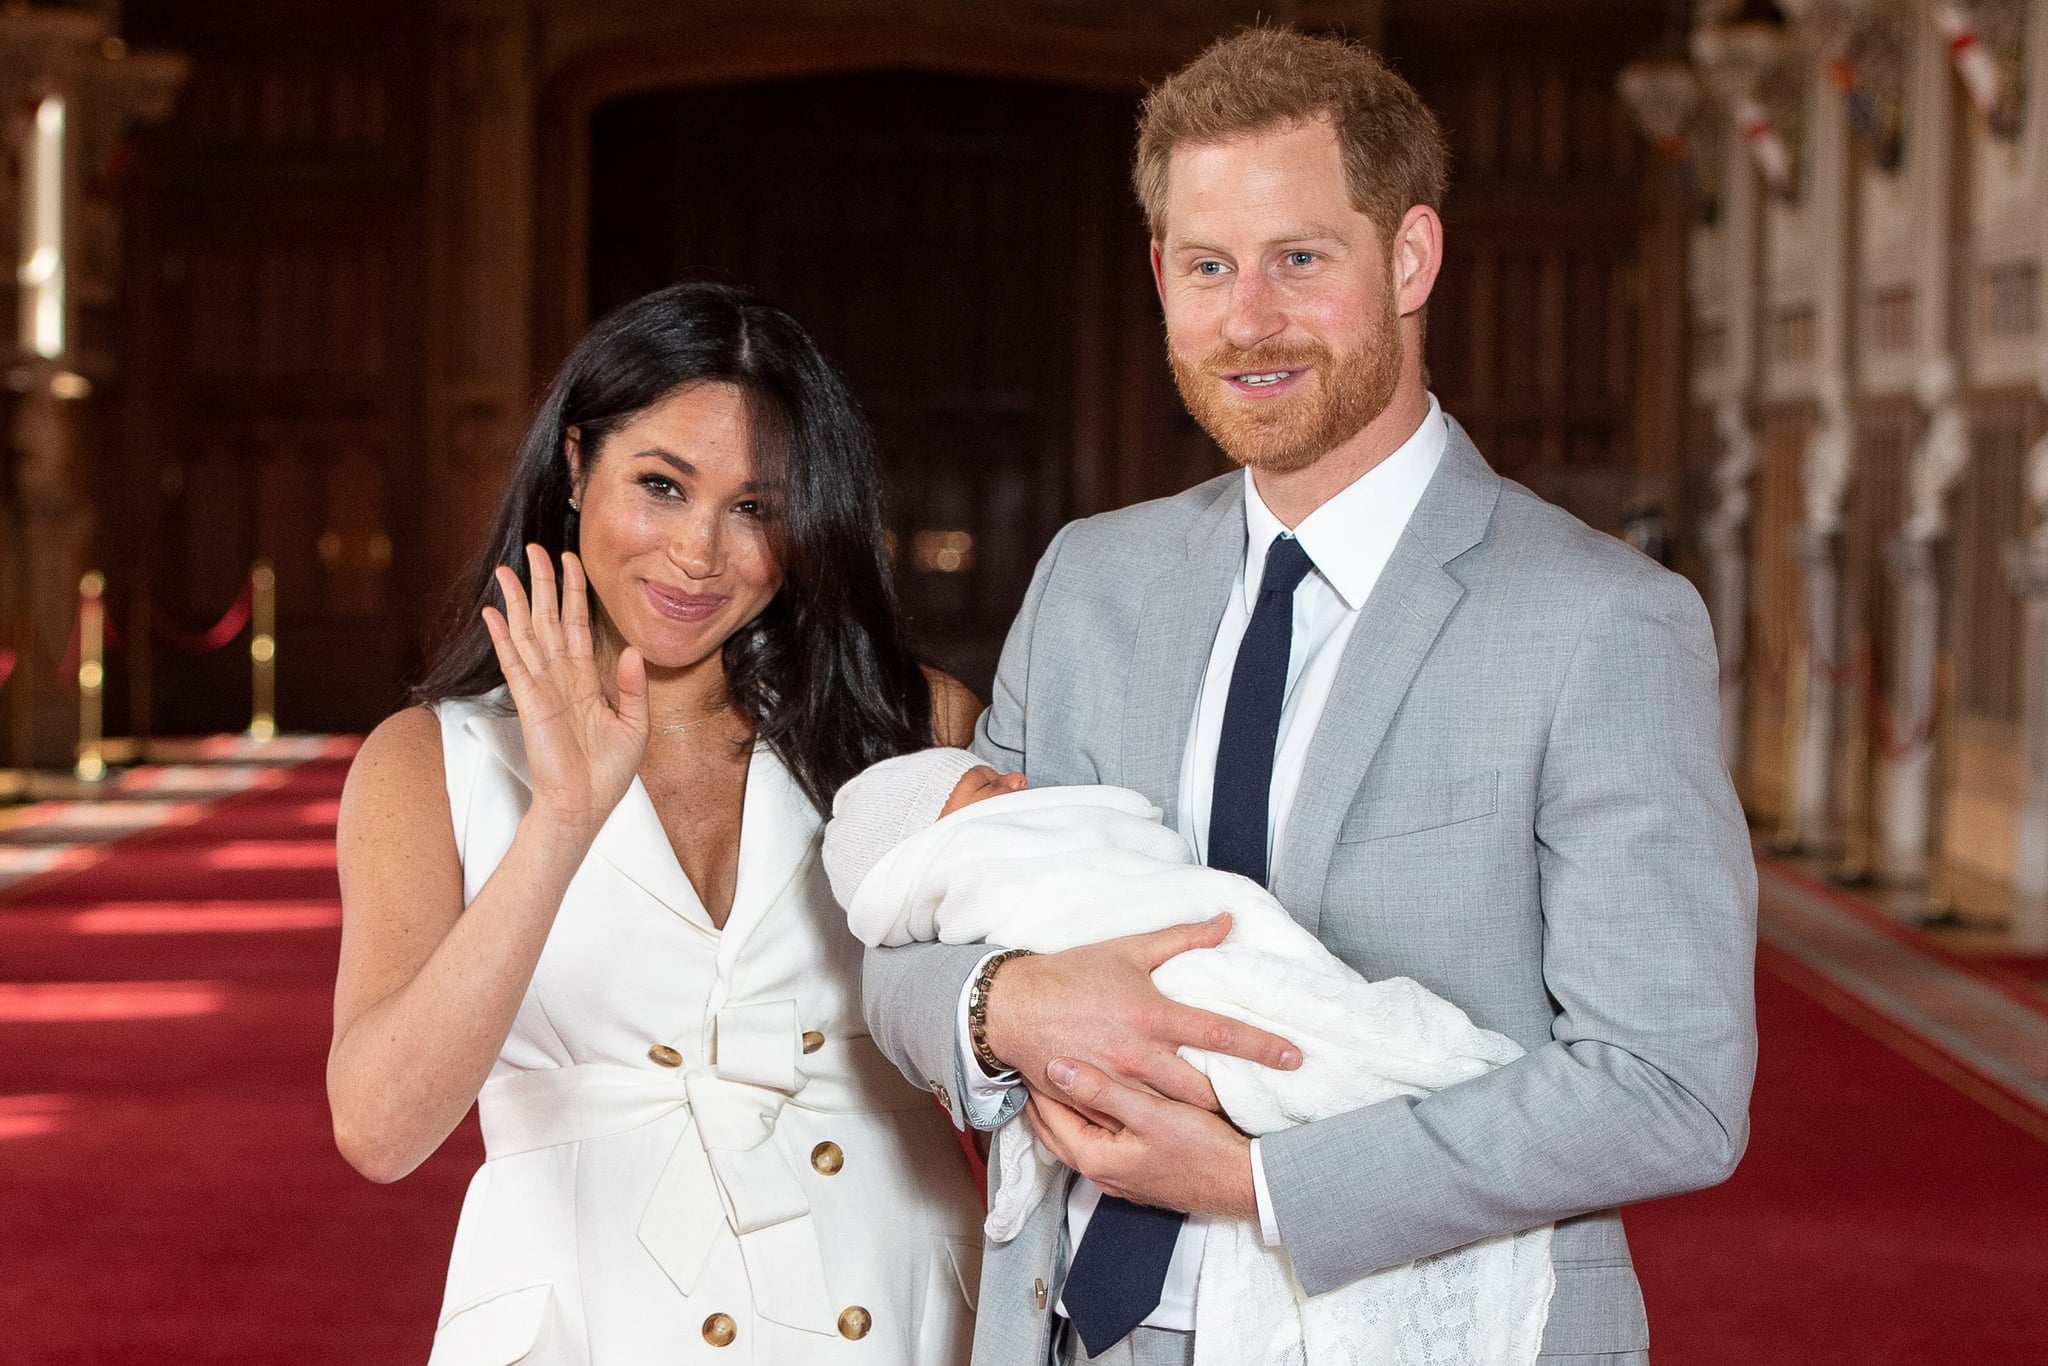 Britain's Prince Harry, Duke of Sussex (R), and his wife Meghan, Duchess of Sussex, pose for a photo with their newborn baby son in St George's Hall at Windsor Castle in Windsor, west of London on May 8, 2019. (Photo by Dominic Lipinski / POOL / AFP)        (Photo credit should read DOMINIC LIPINSKI/AFP/Getty Images)